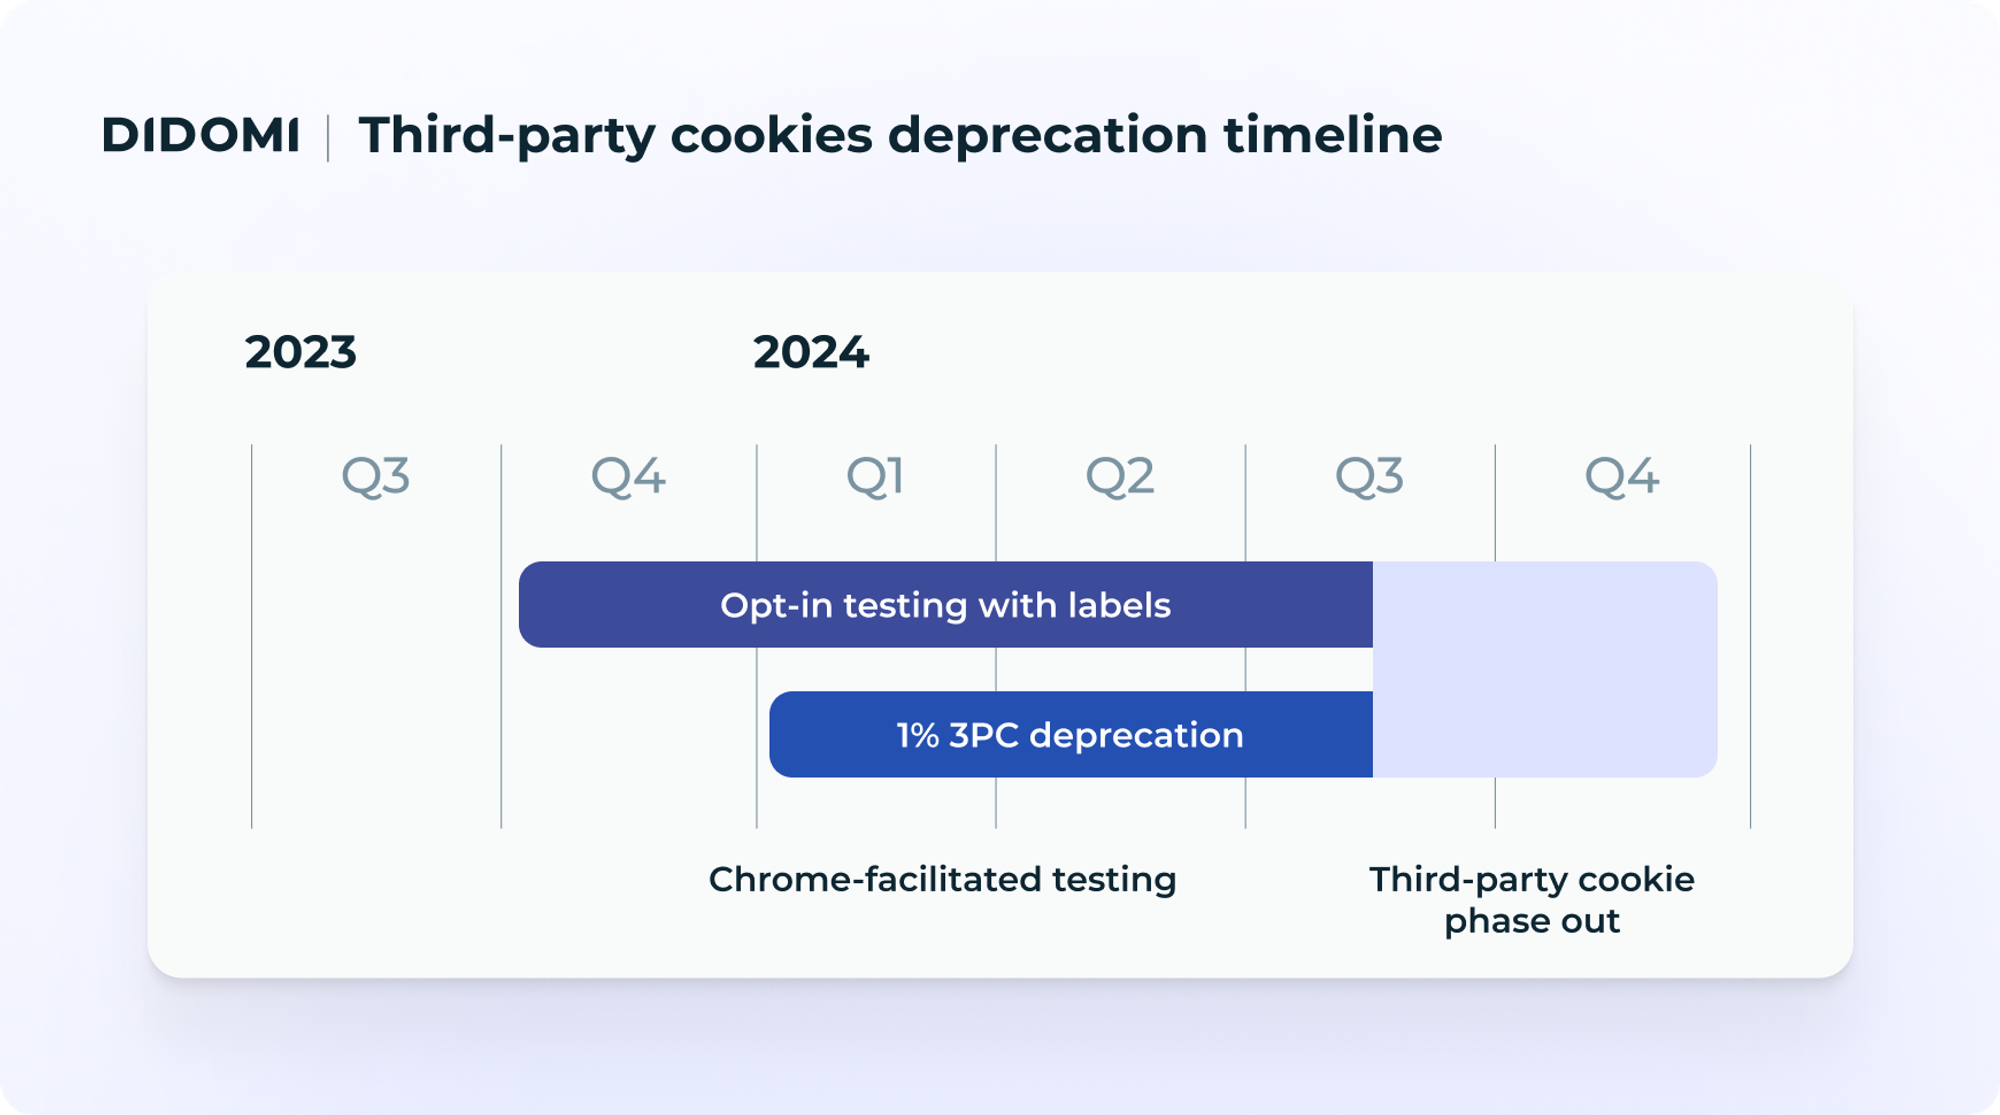 timeline of third-party cookies deprecation in Crhome, starting with opt-in testing with labels in Q4 2023, then with 1% of cookie deprecation in Q1 2024, and the phase-out happening in Q3 2024